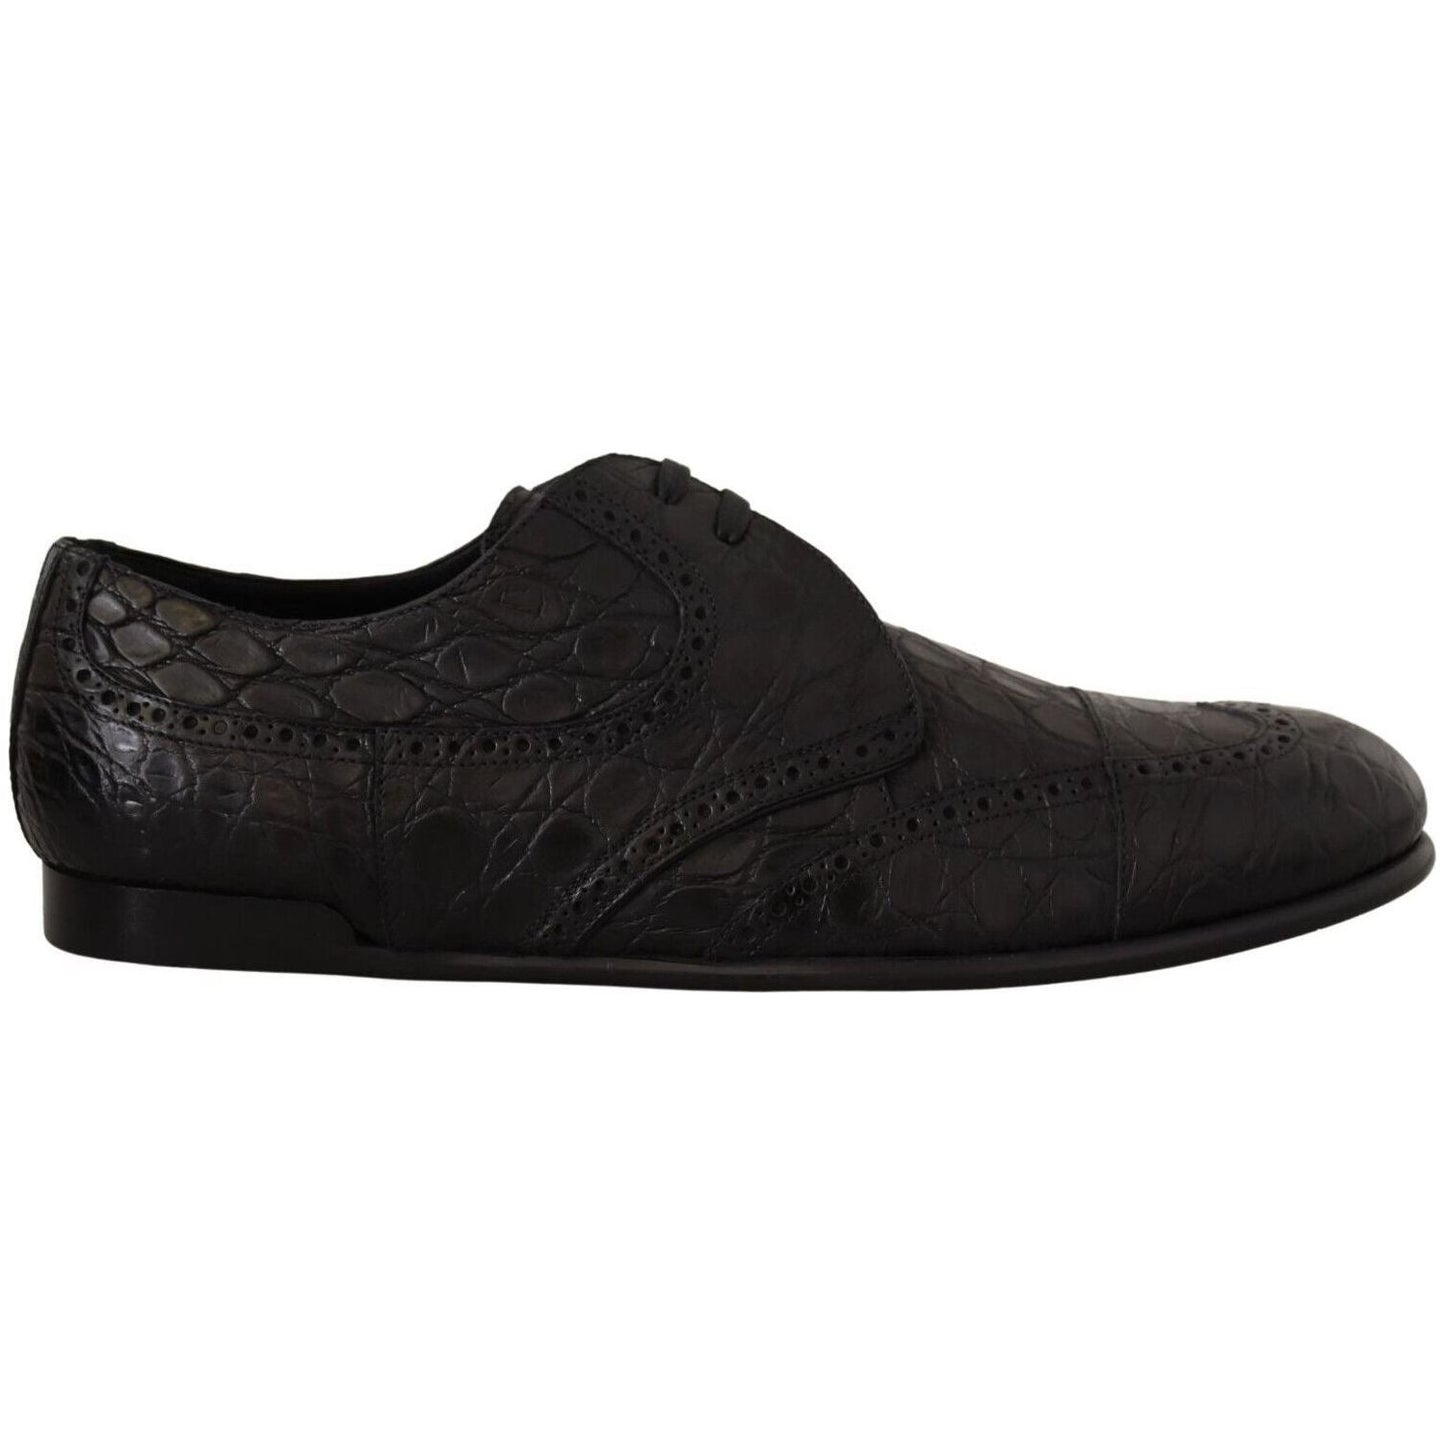 Dolce & Gabbana Exquisite Exotic Leather Derby Shoes black-caiman-leather-mens-derby-shoes